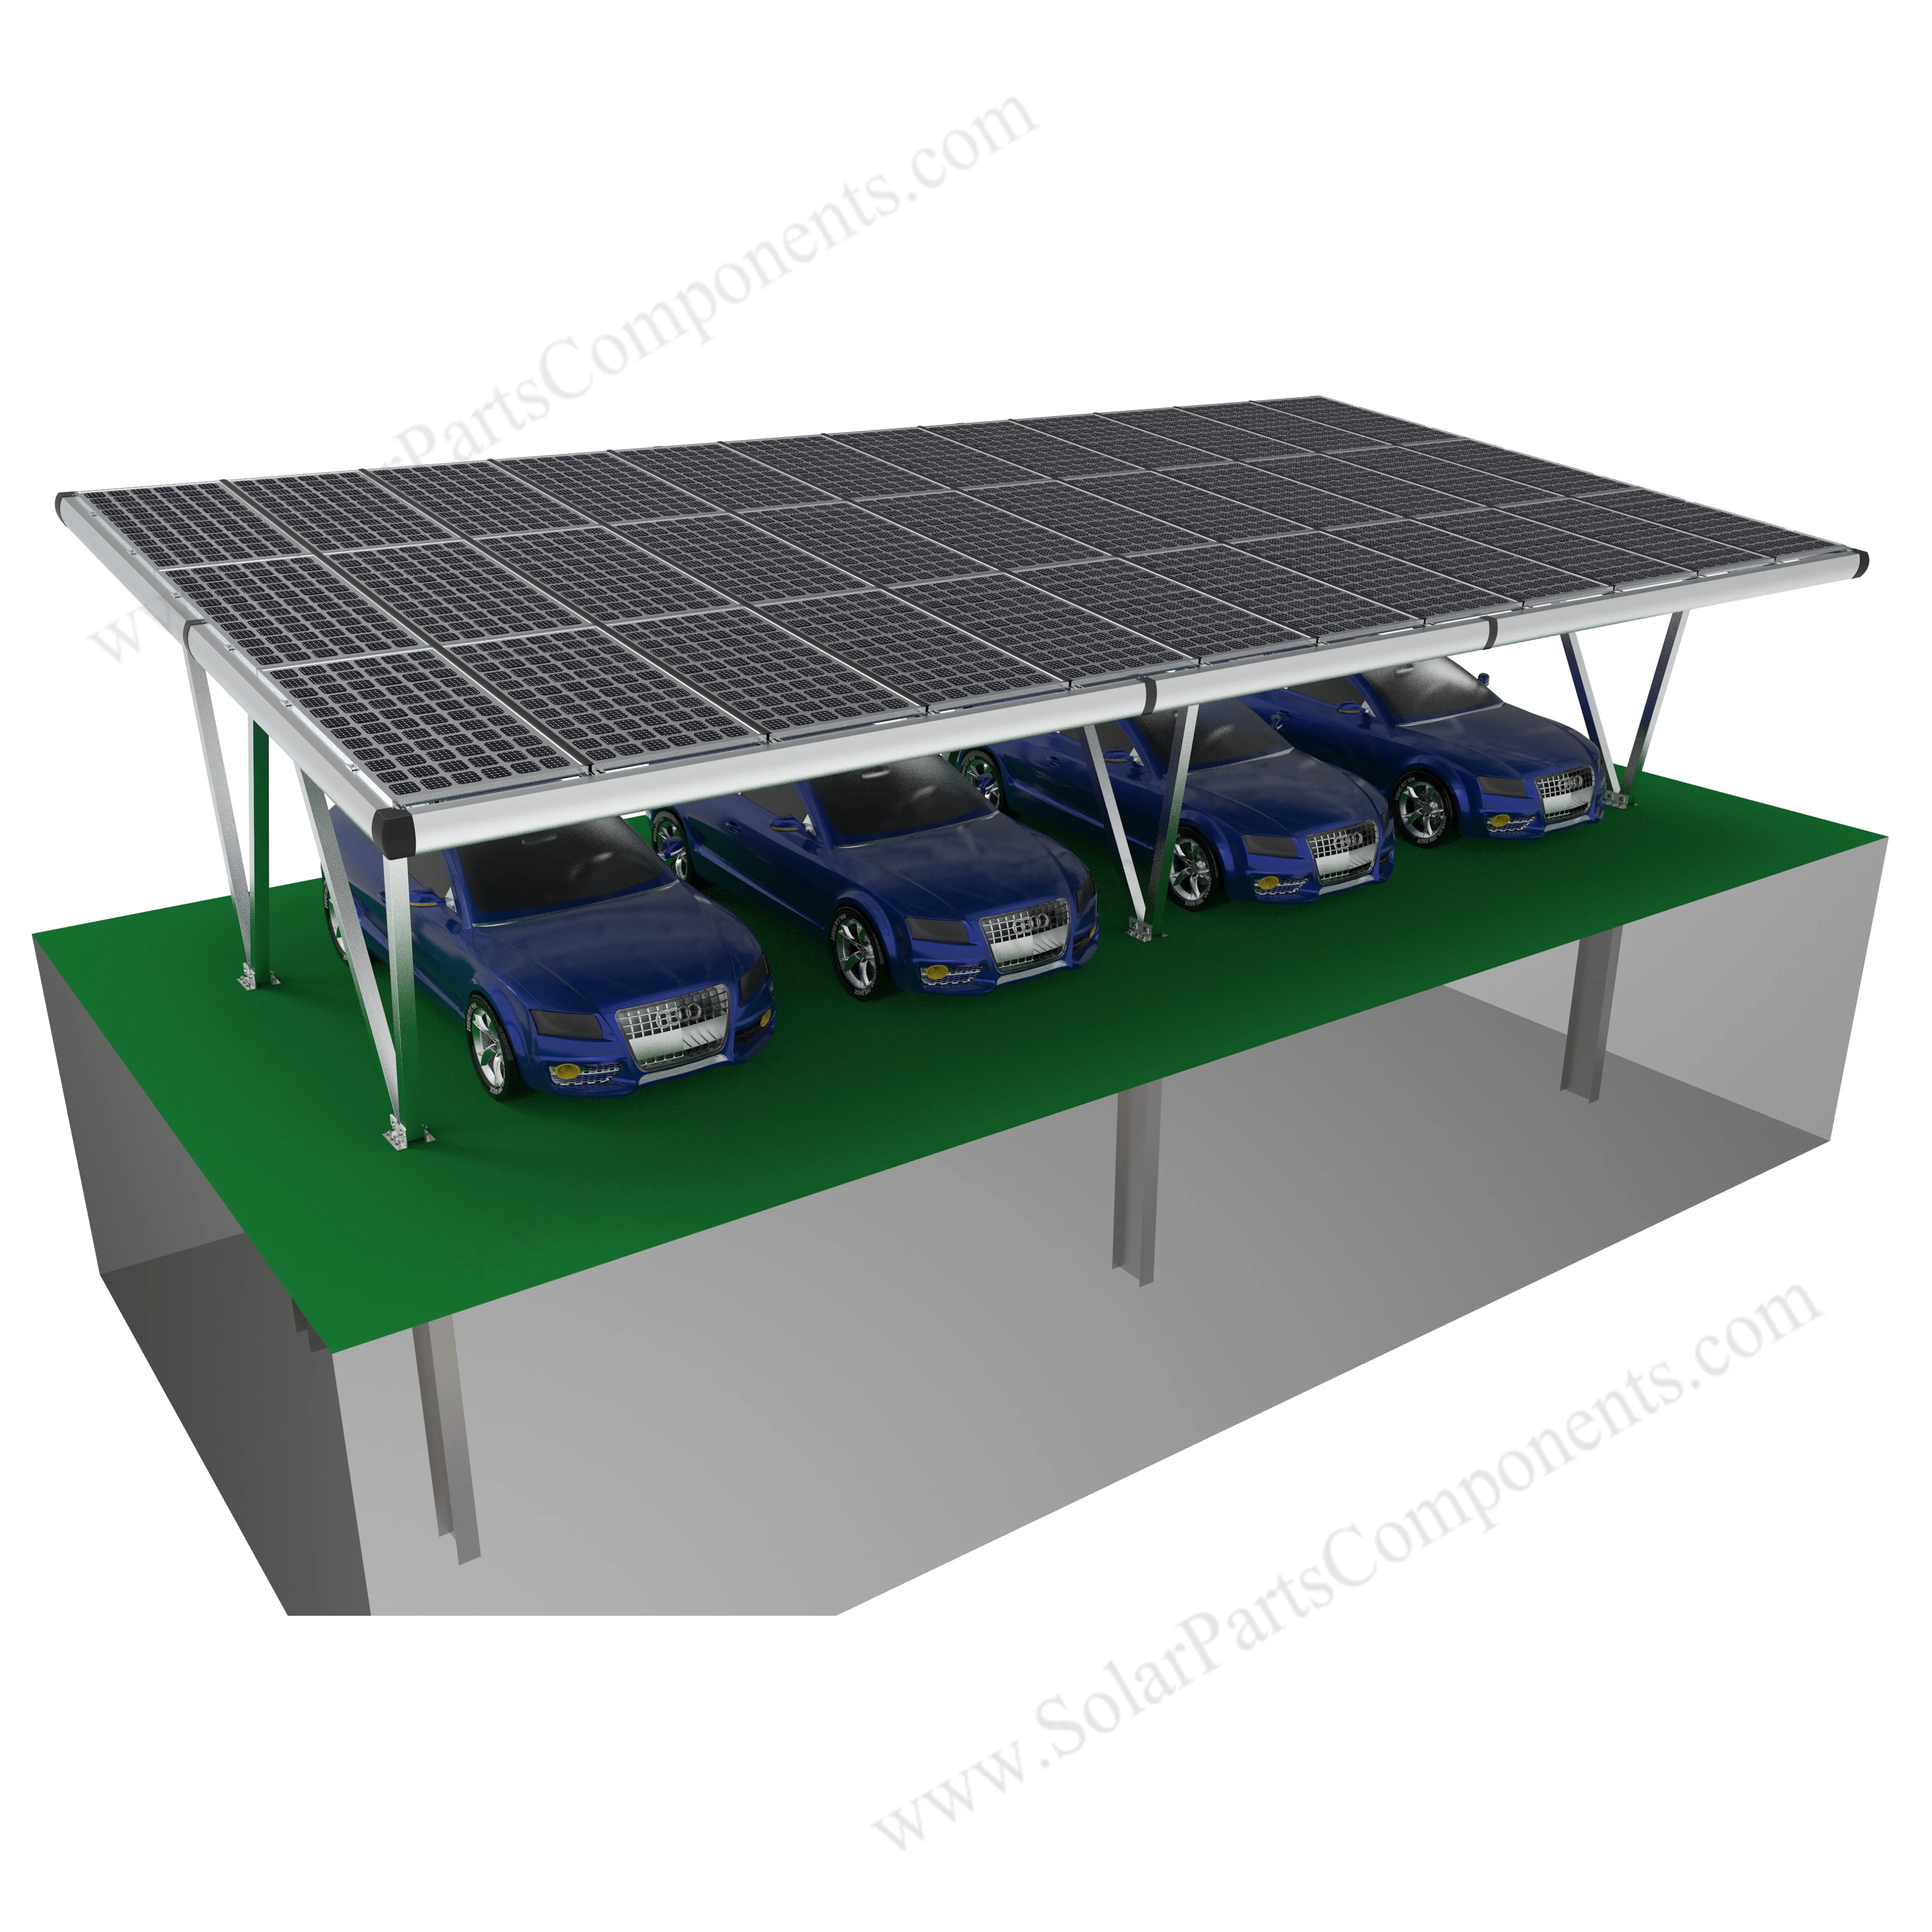 Solar Pv Support Carport Ground Mounting System Solar Structure Buy Solar Pv Support Carport Ground Mounting System Solar Structure Solar Parking Carport Aluminum Carport Kit Carport Pv Ground Mounting System Waterproof Solar Carport